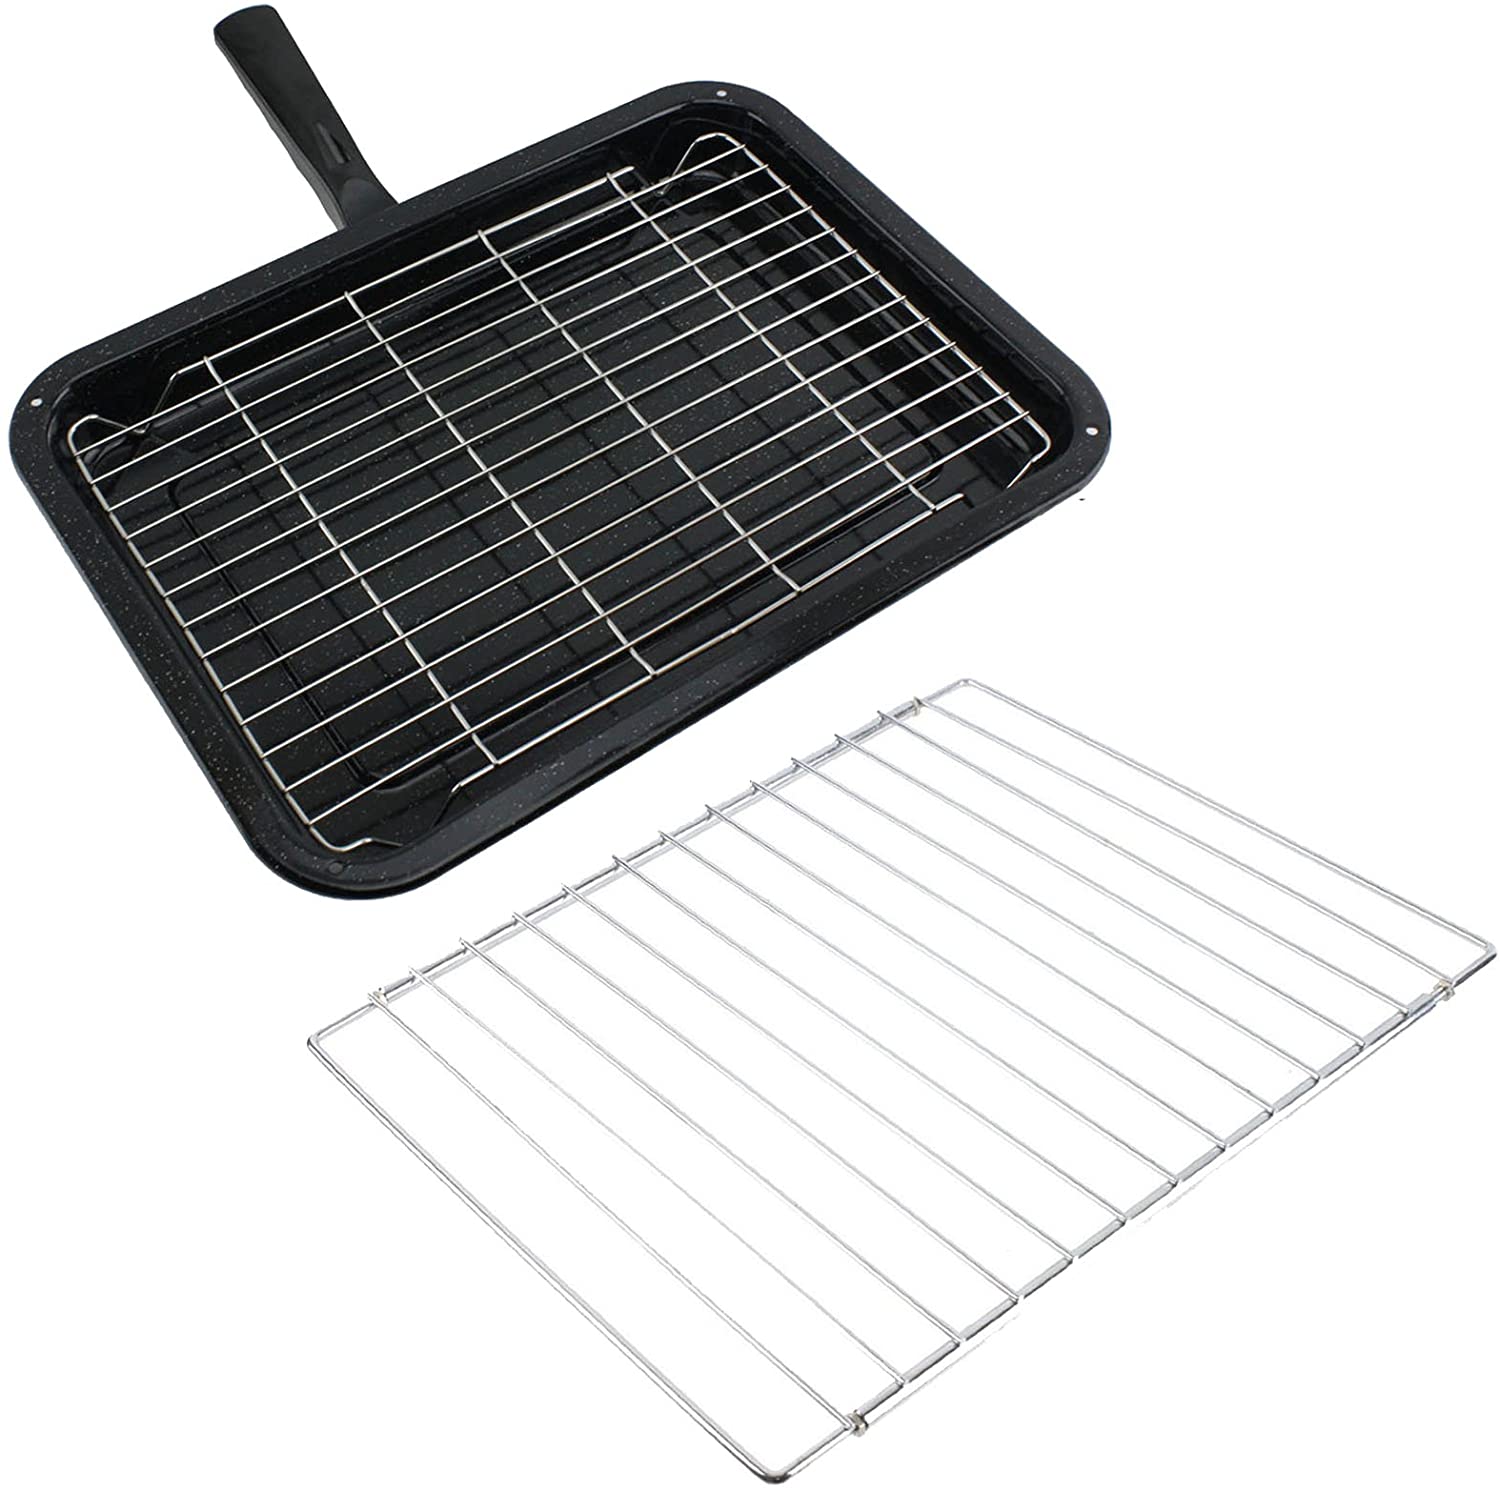 Small Grill Pan with Rack and Detachable Handle + Adjustable Grill Shelf for SWAN Oven Cooker